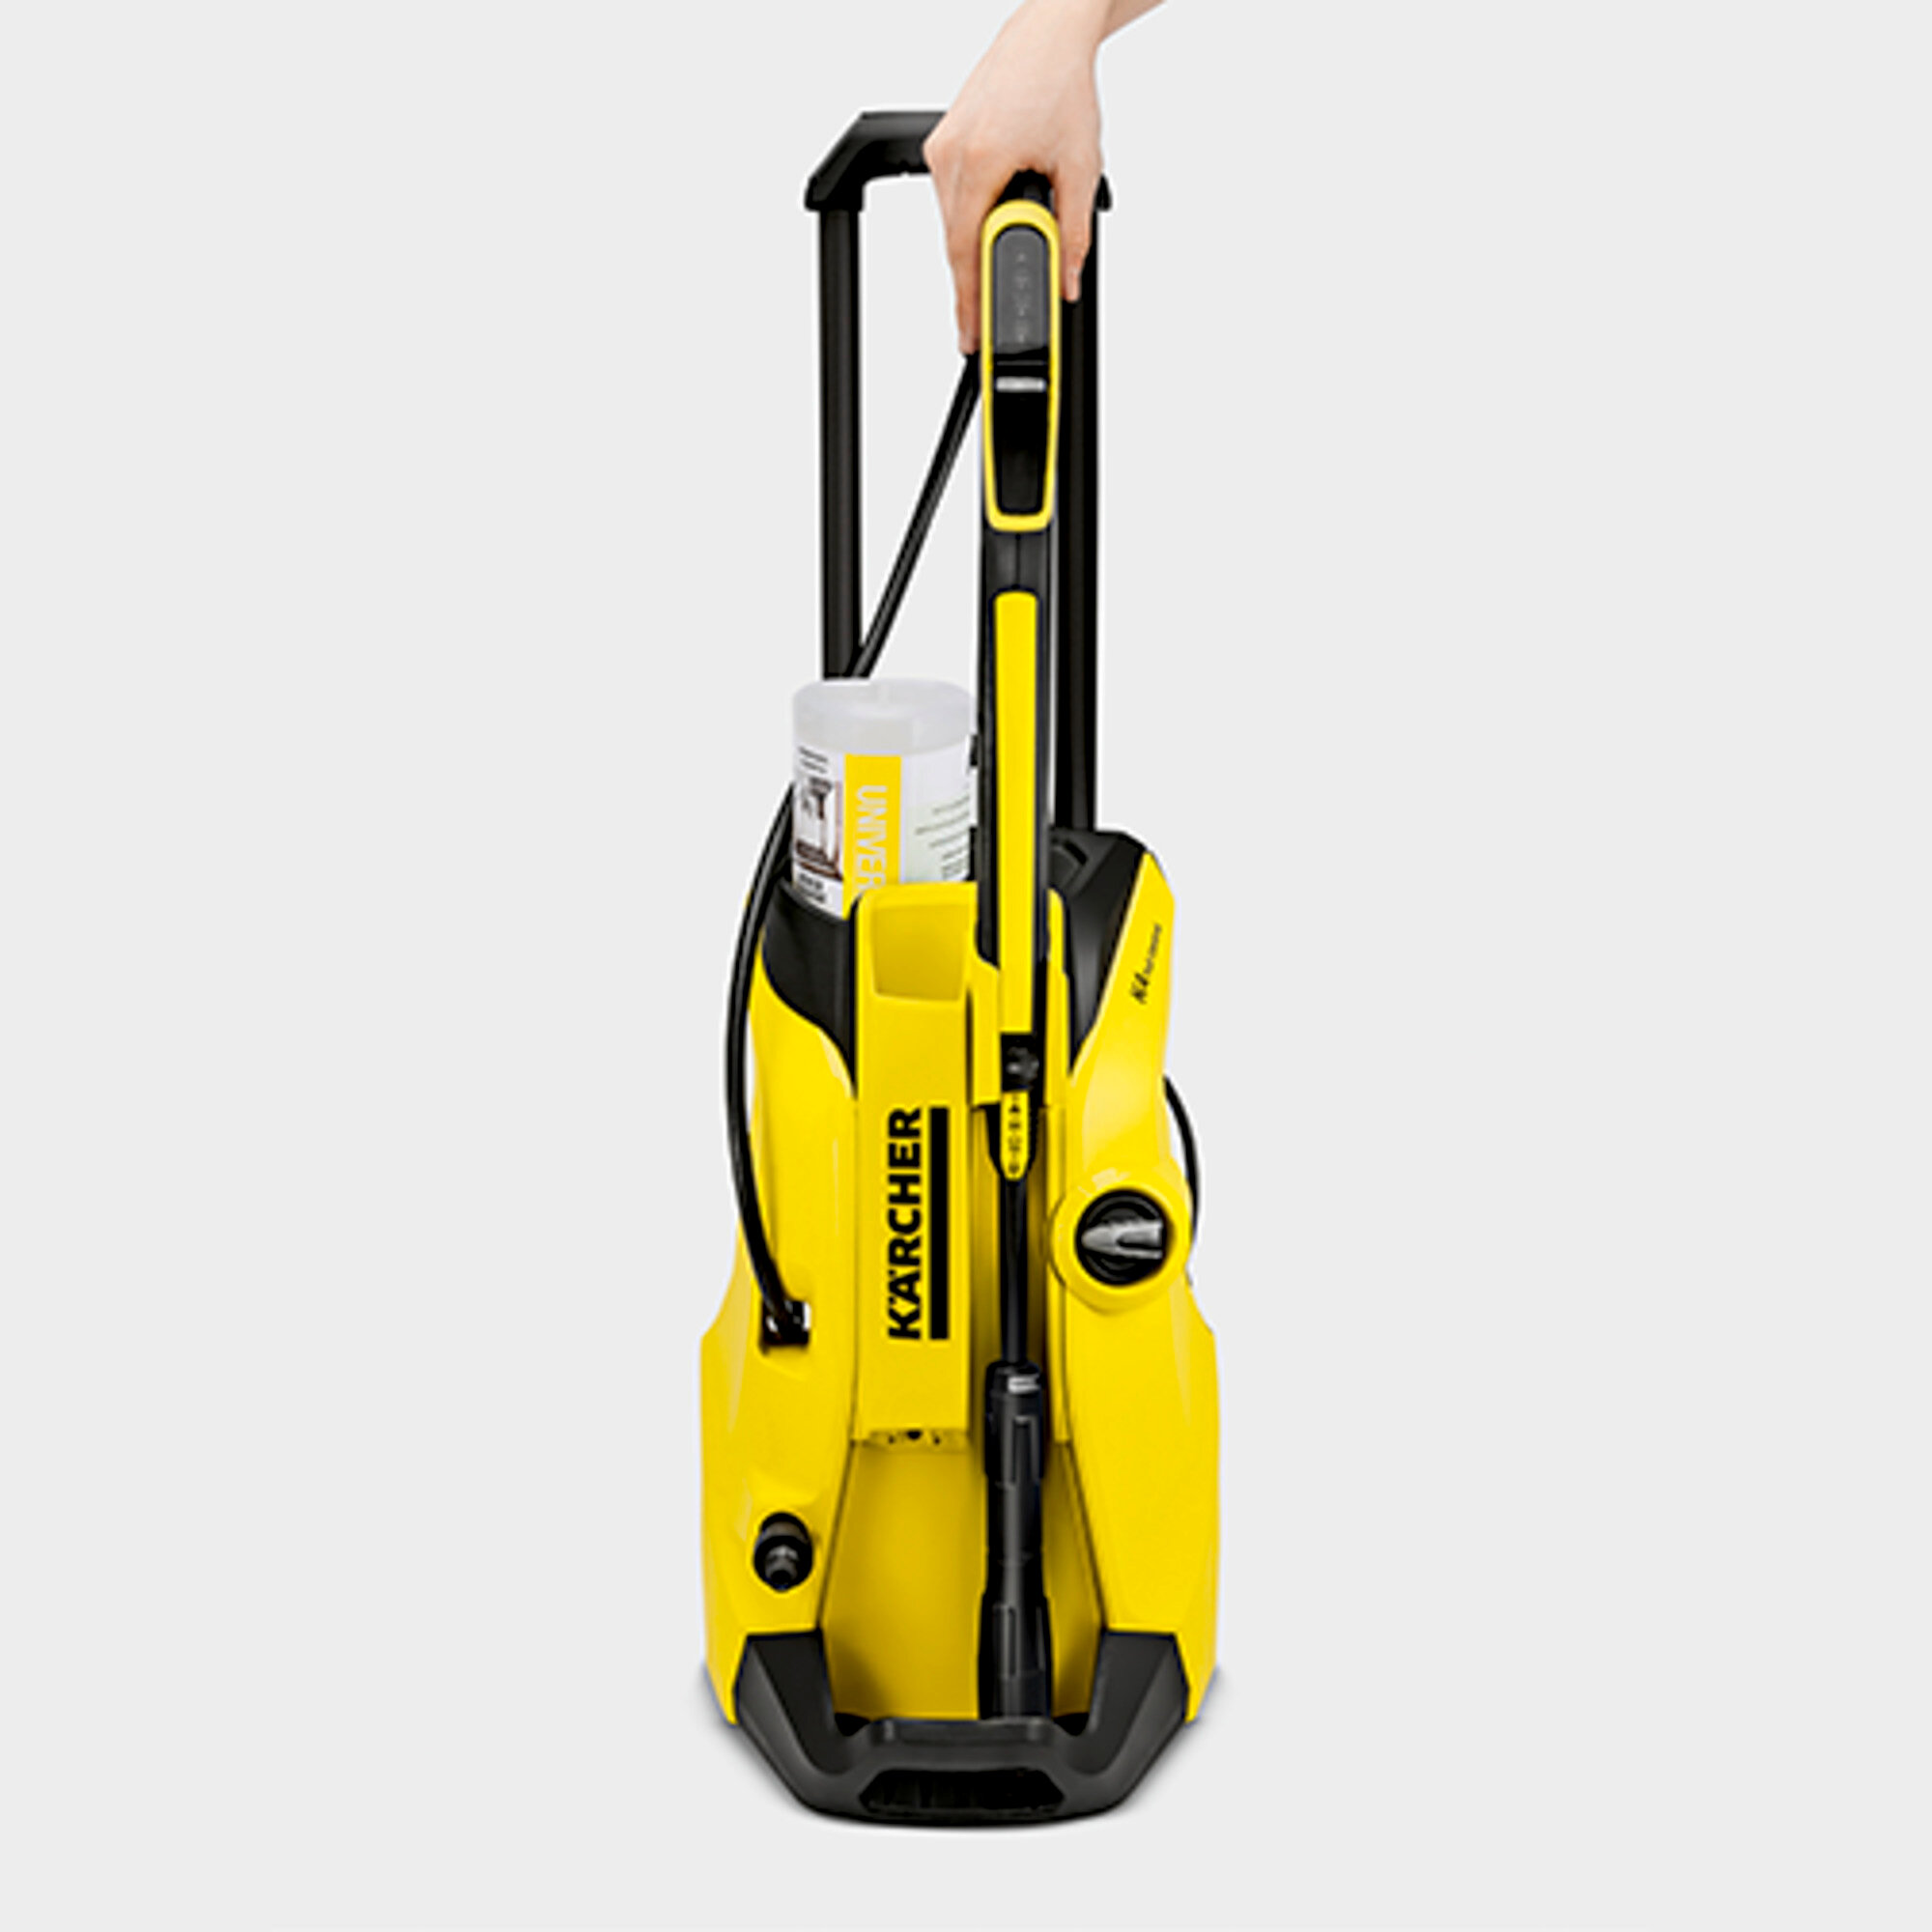 High pressure washer K 4 Full Control: Parking position for easy accessory storage at all times